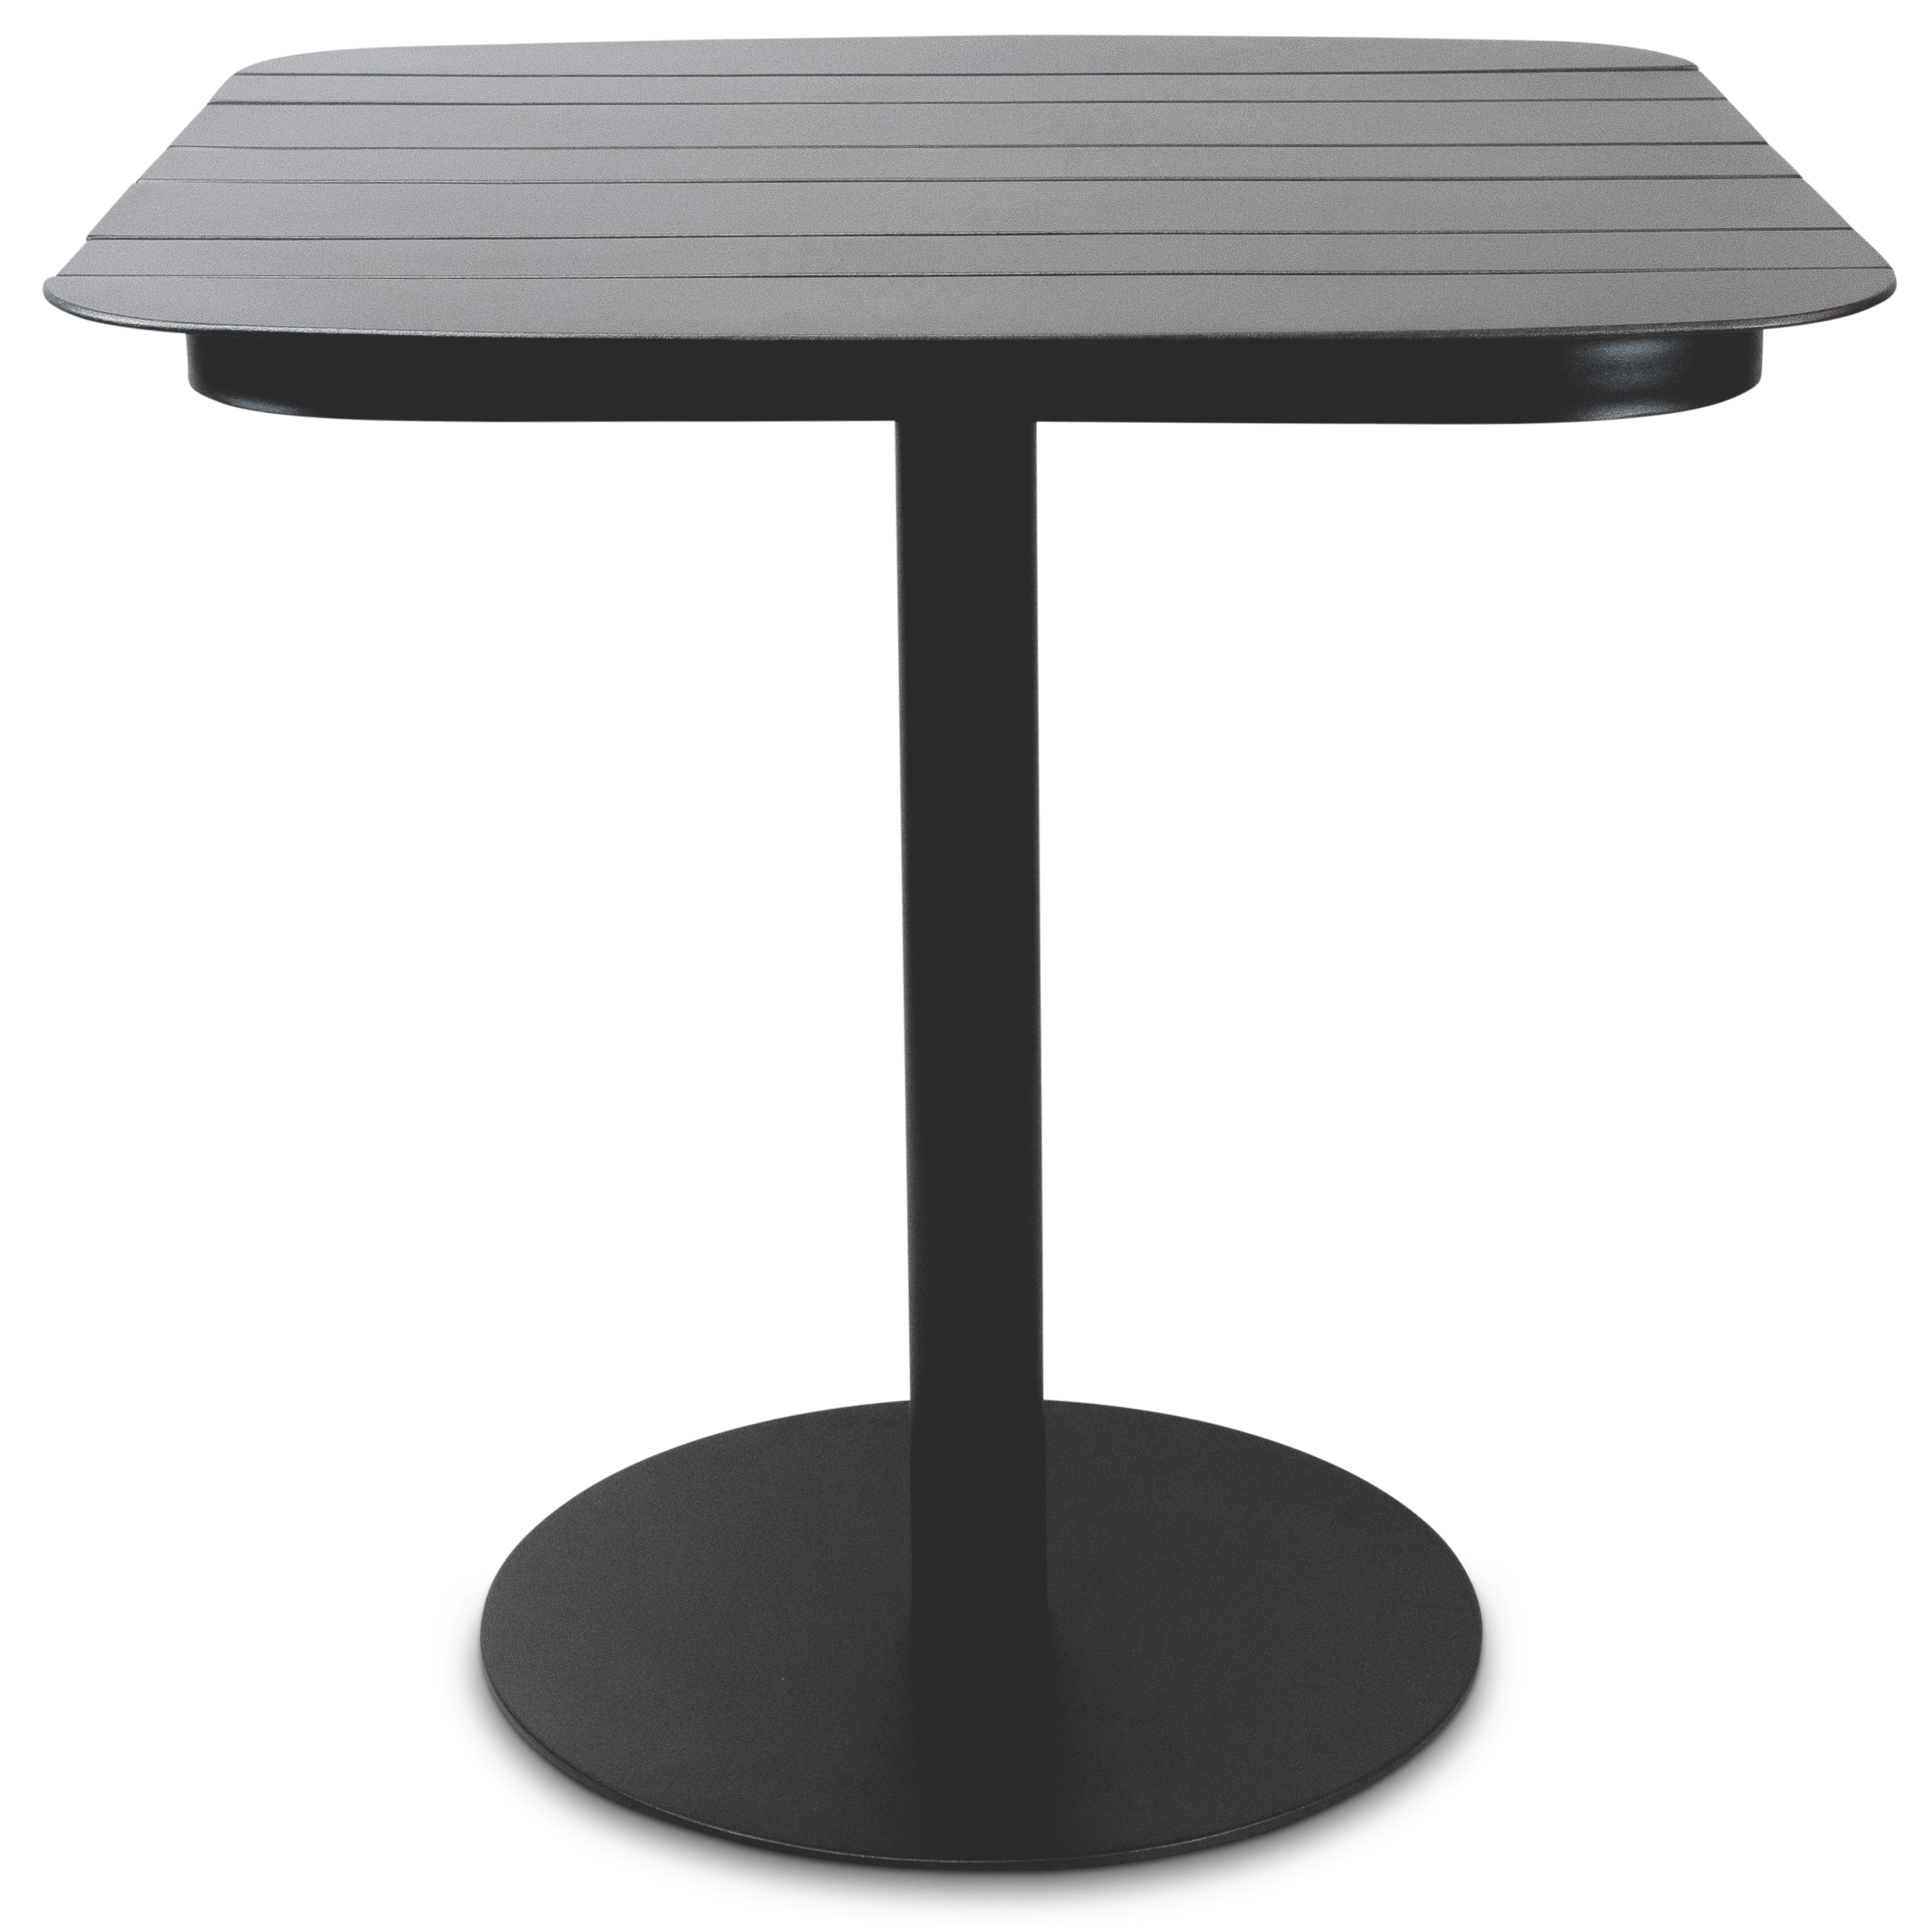 Cafe Collection Square Dining Table in Aluminium and Steel Base in Gunmetal